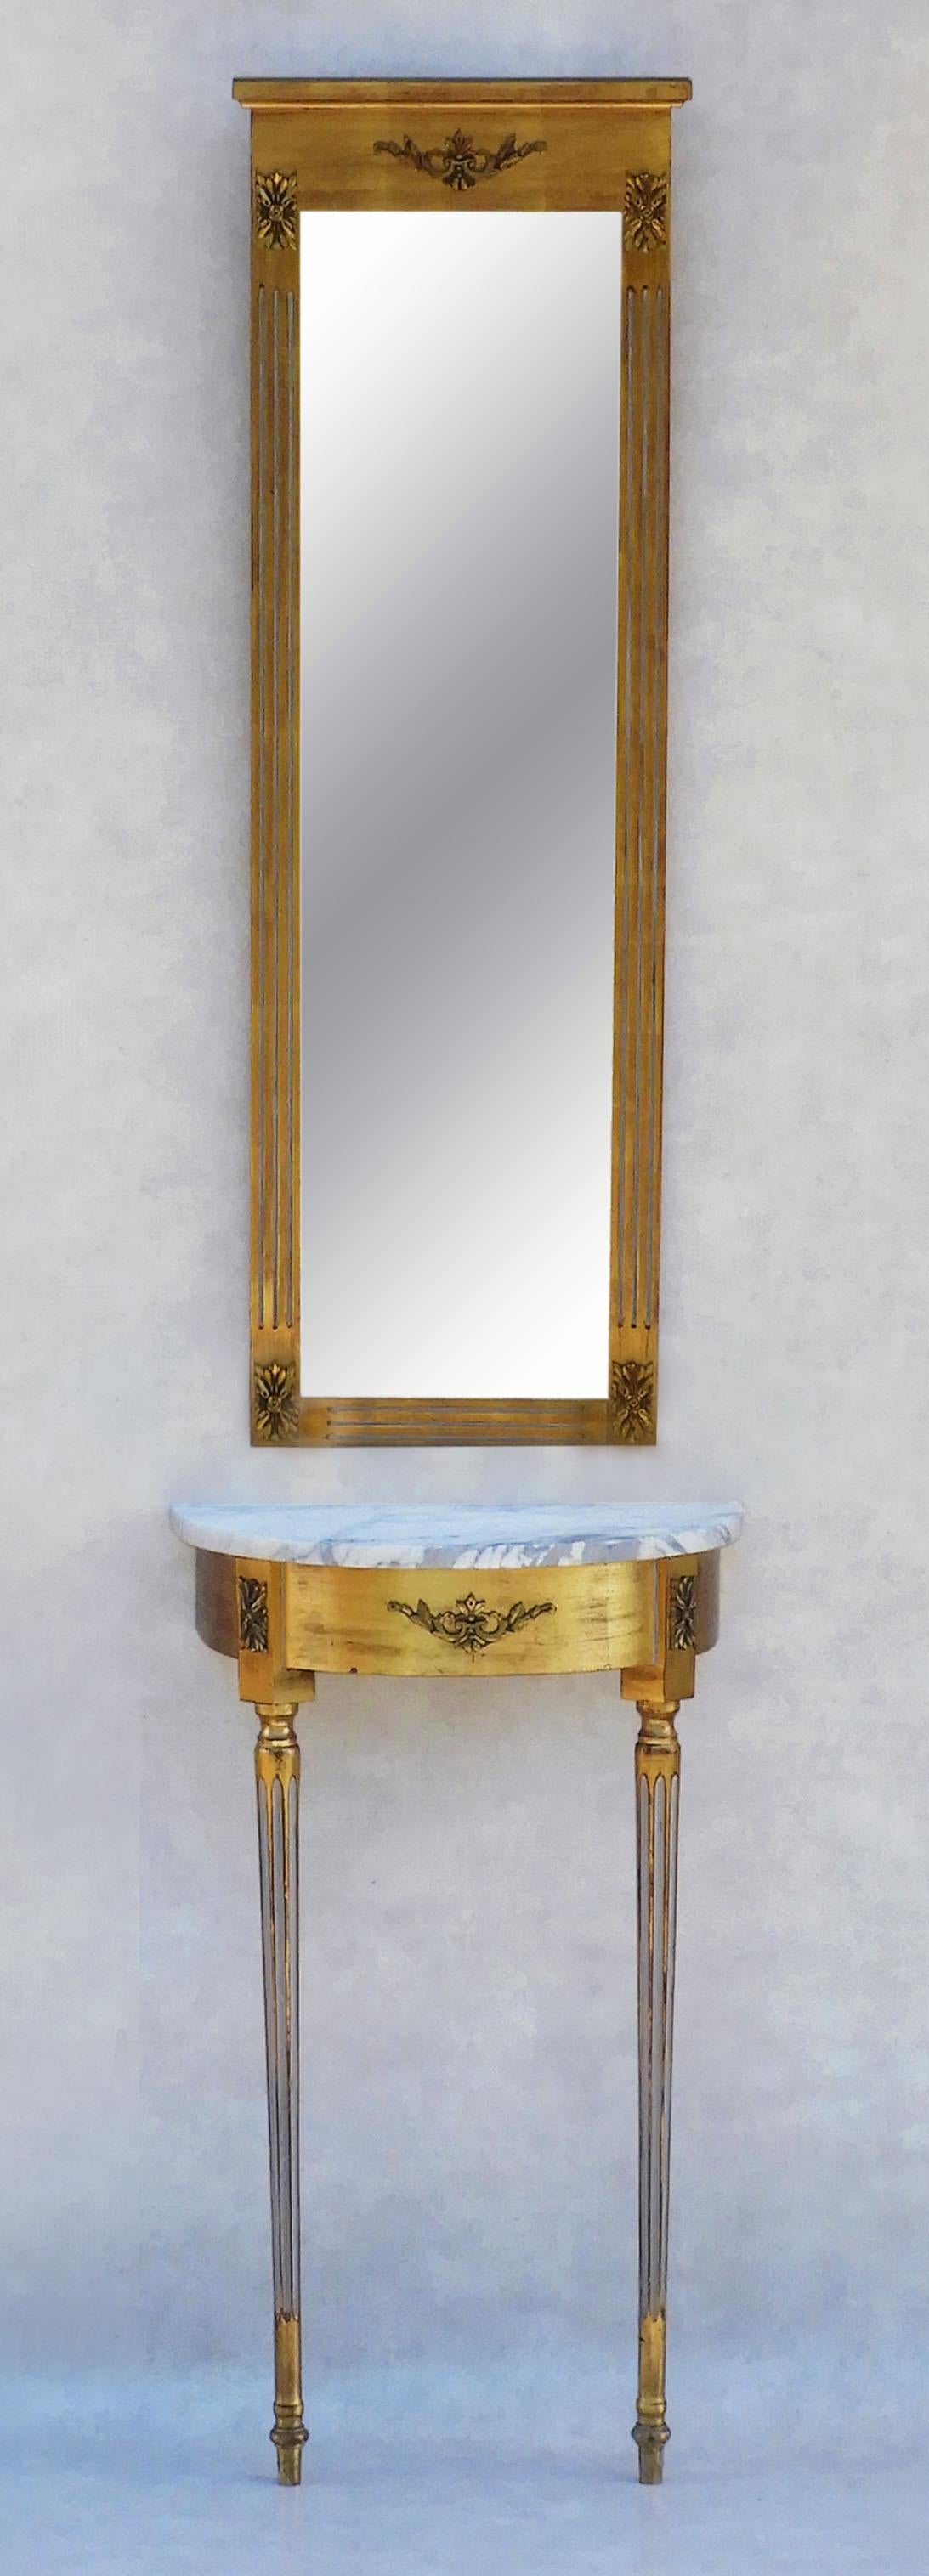 A gorgeous Louis XVI Revival giltwood and marble console table and bevelled mirror, c1950s France. 
Beautiful giltwood gesso and wall-mounted table, topped in white veined marble and a tall and slender bevelled mirror. 
Stylish and simple